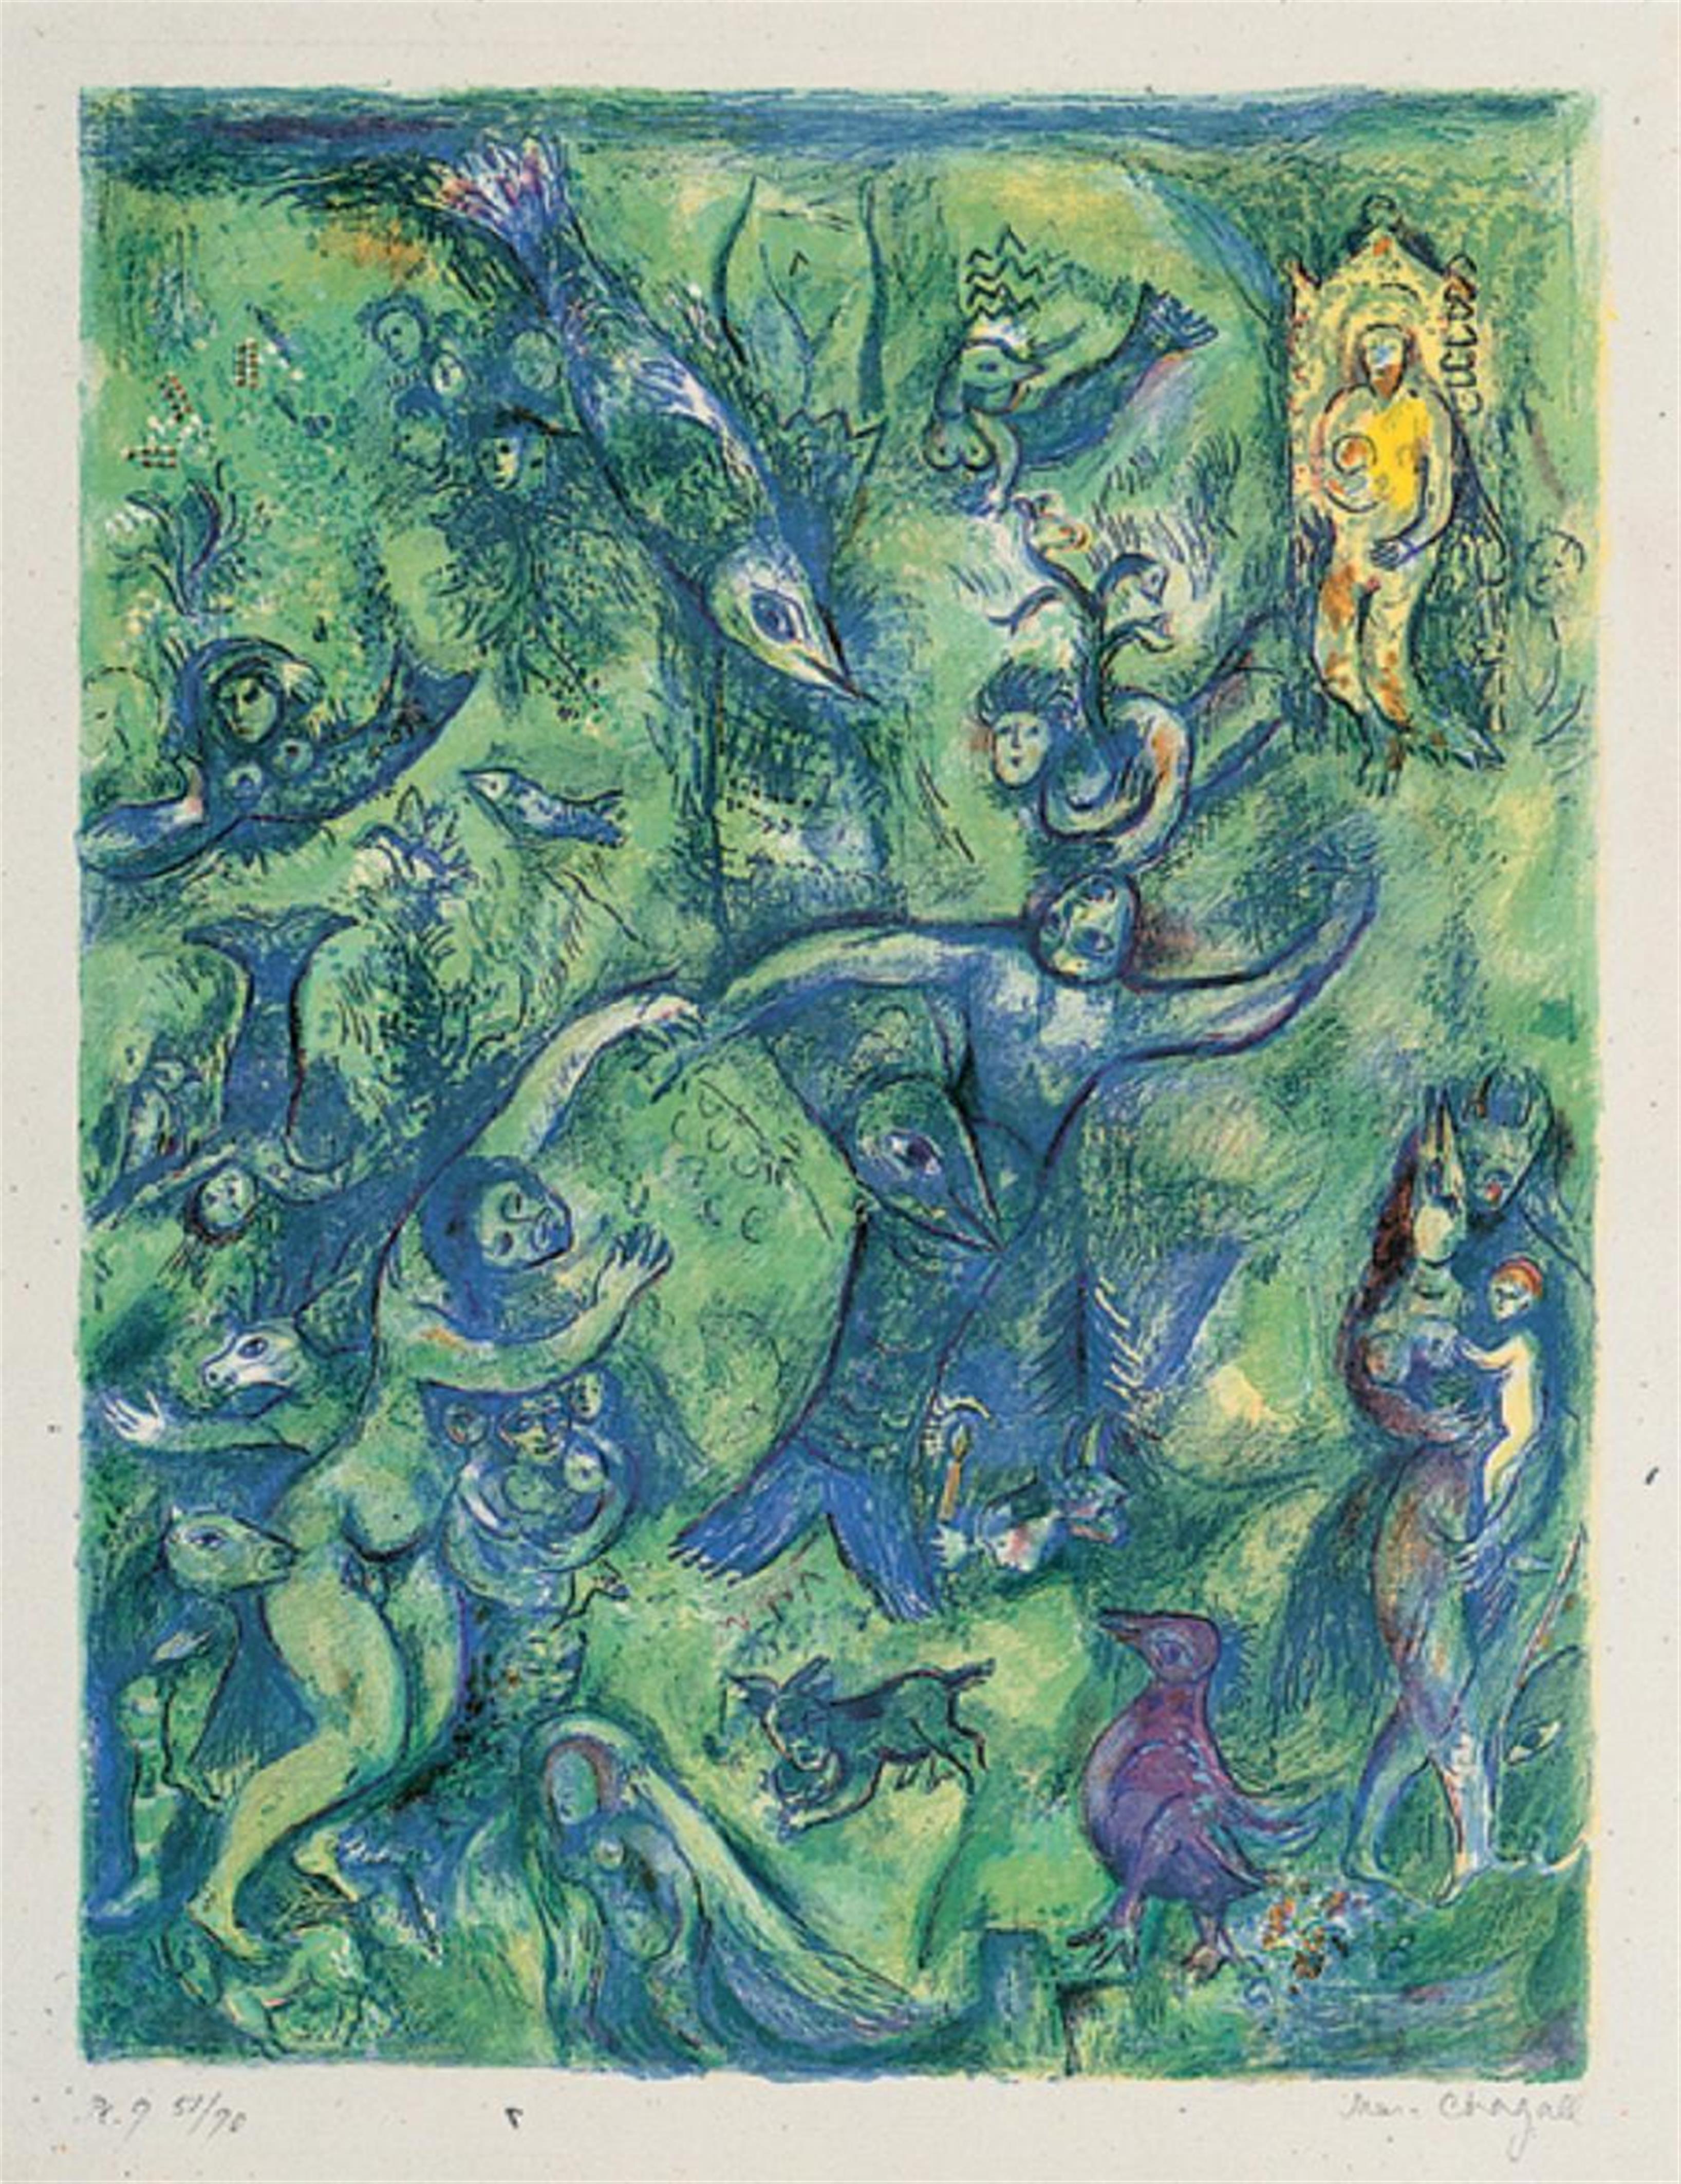 Marc Chagall - Four Tales from the Arabian Nights: Bildtafel 9 des Albums - image-1